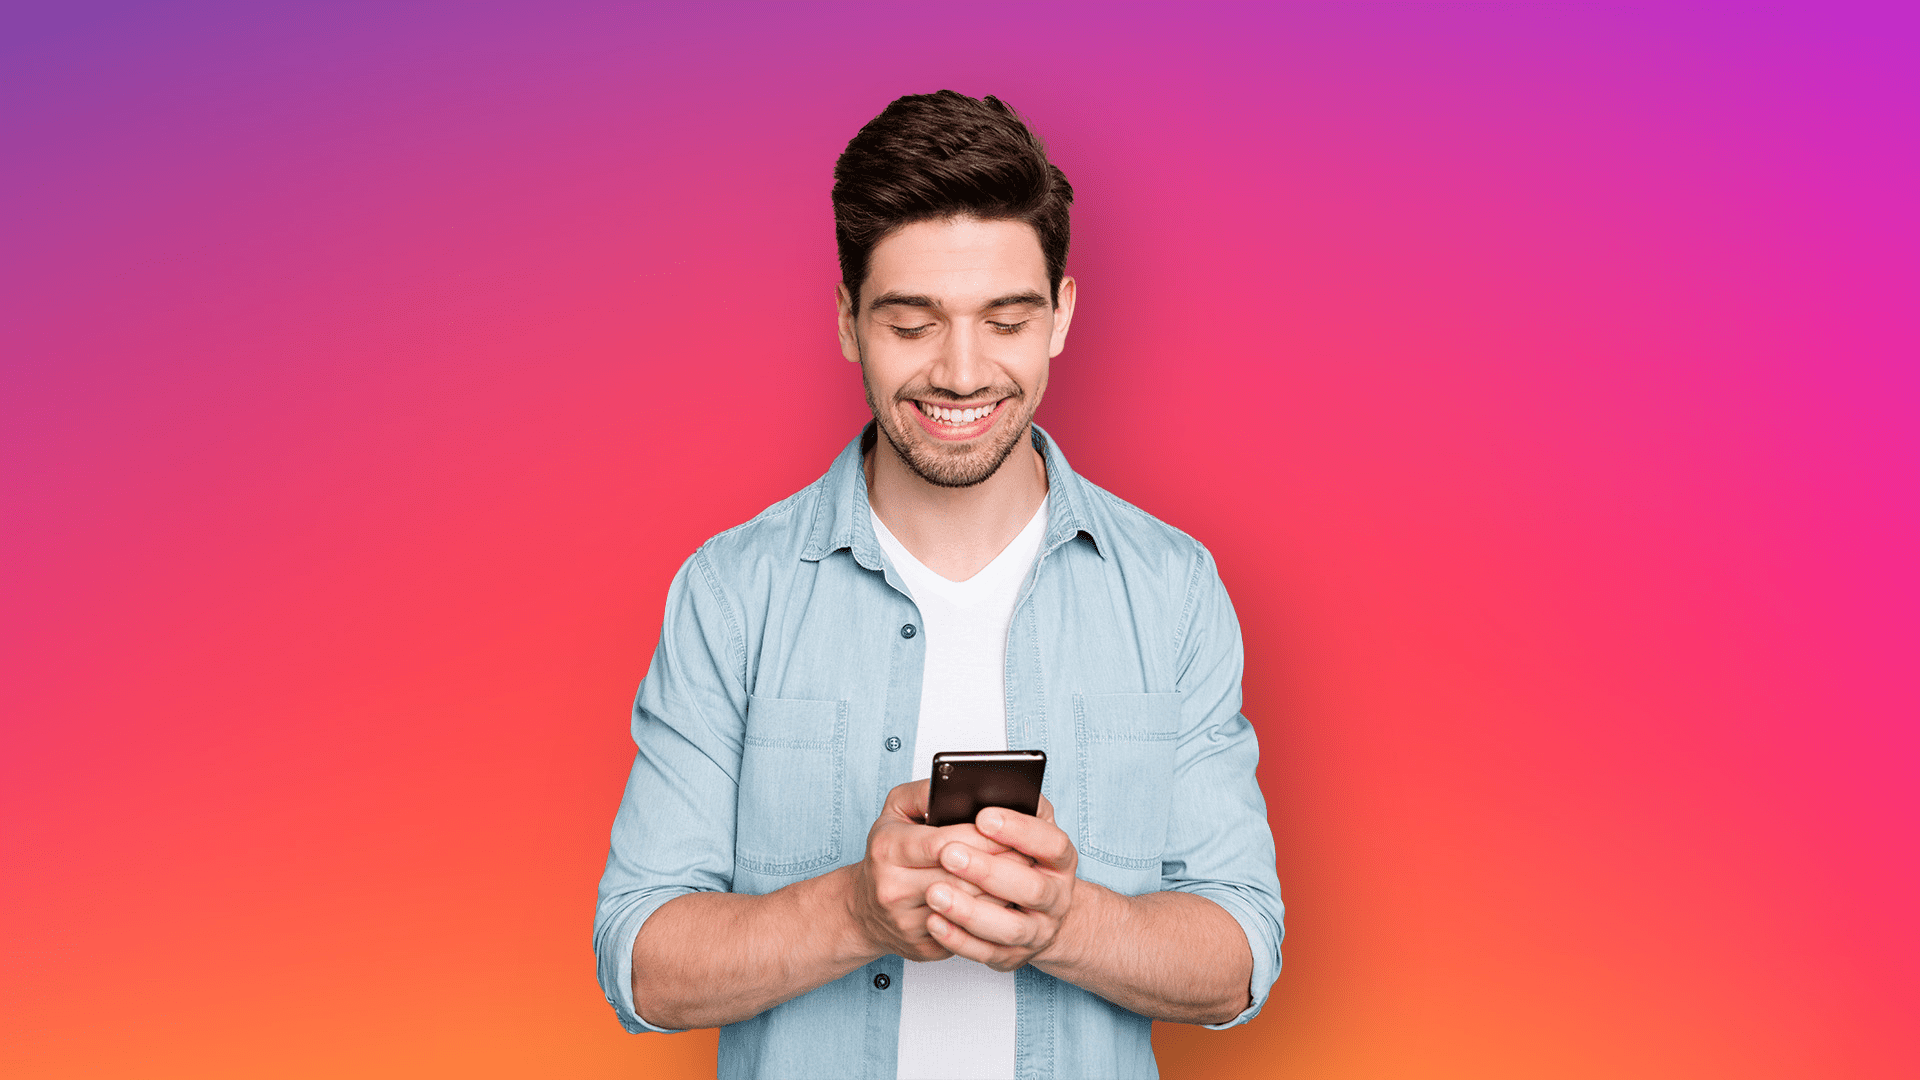 Instagram Marketing Guide: 9 Tips That Actually Work